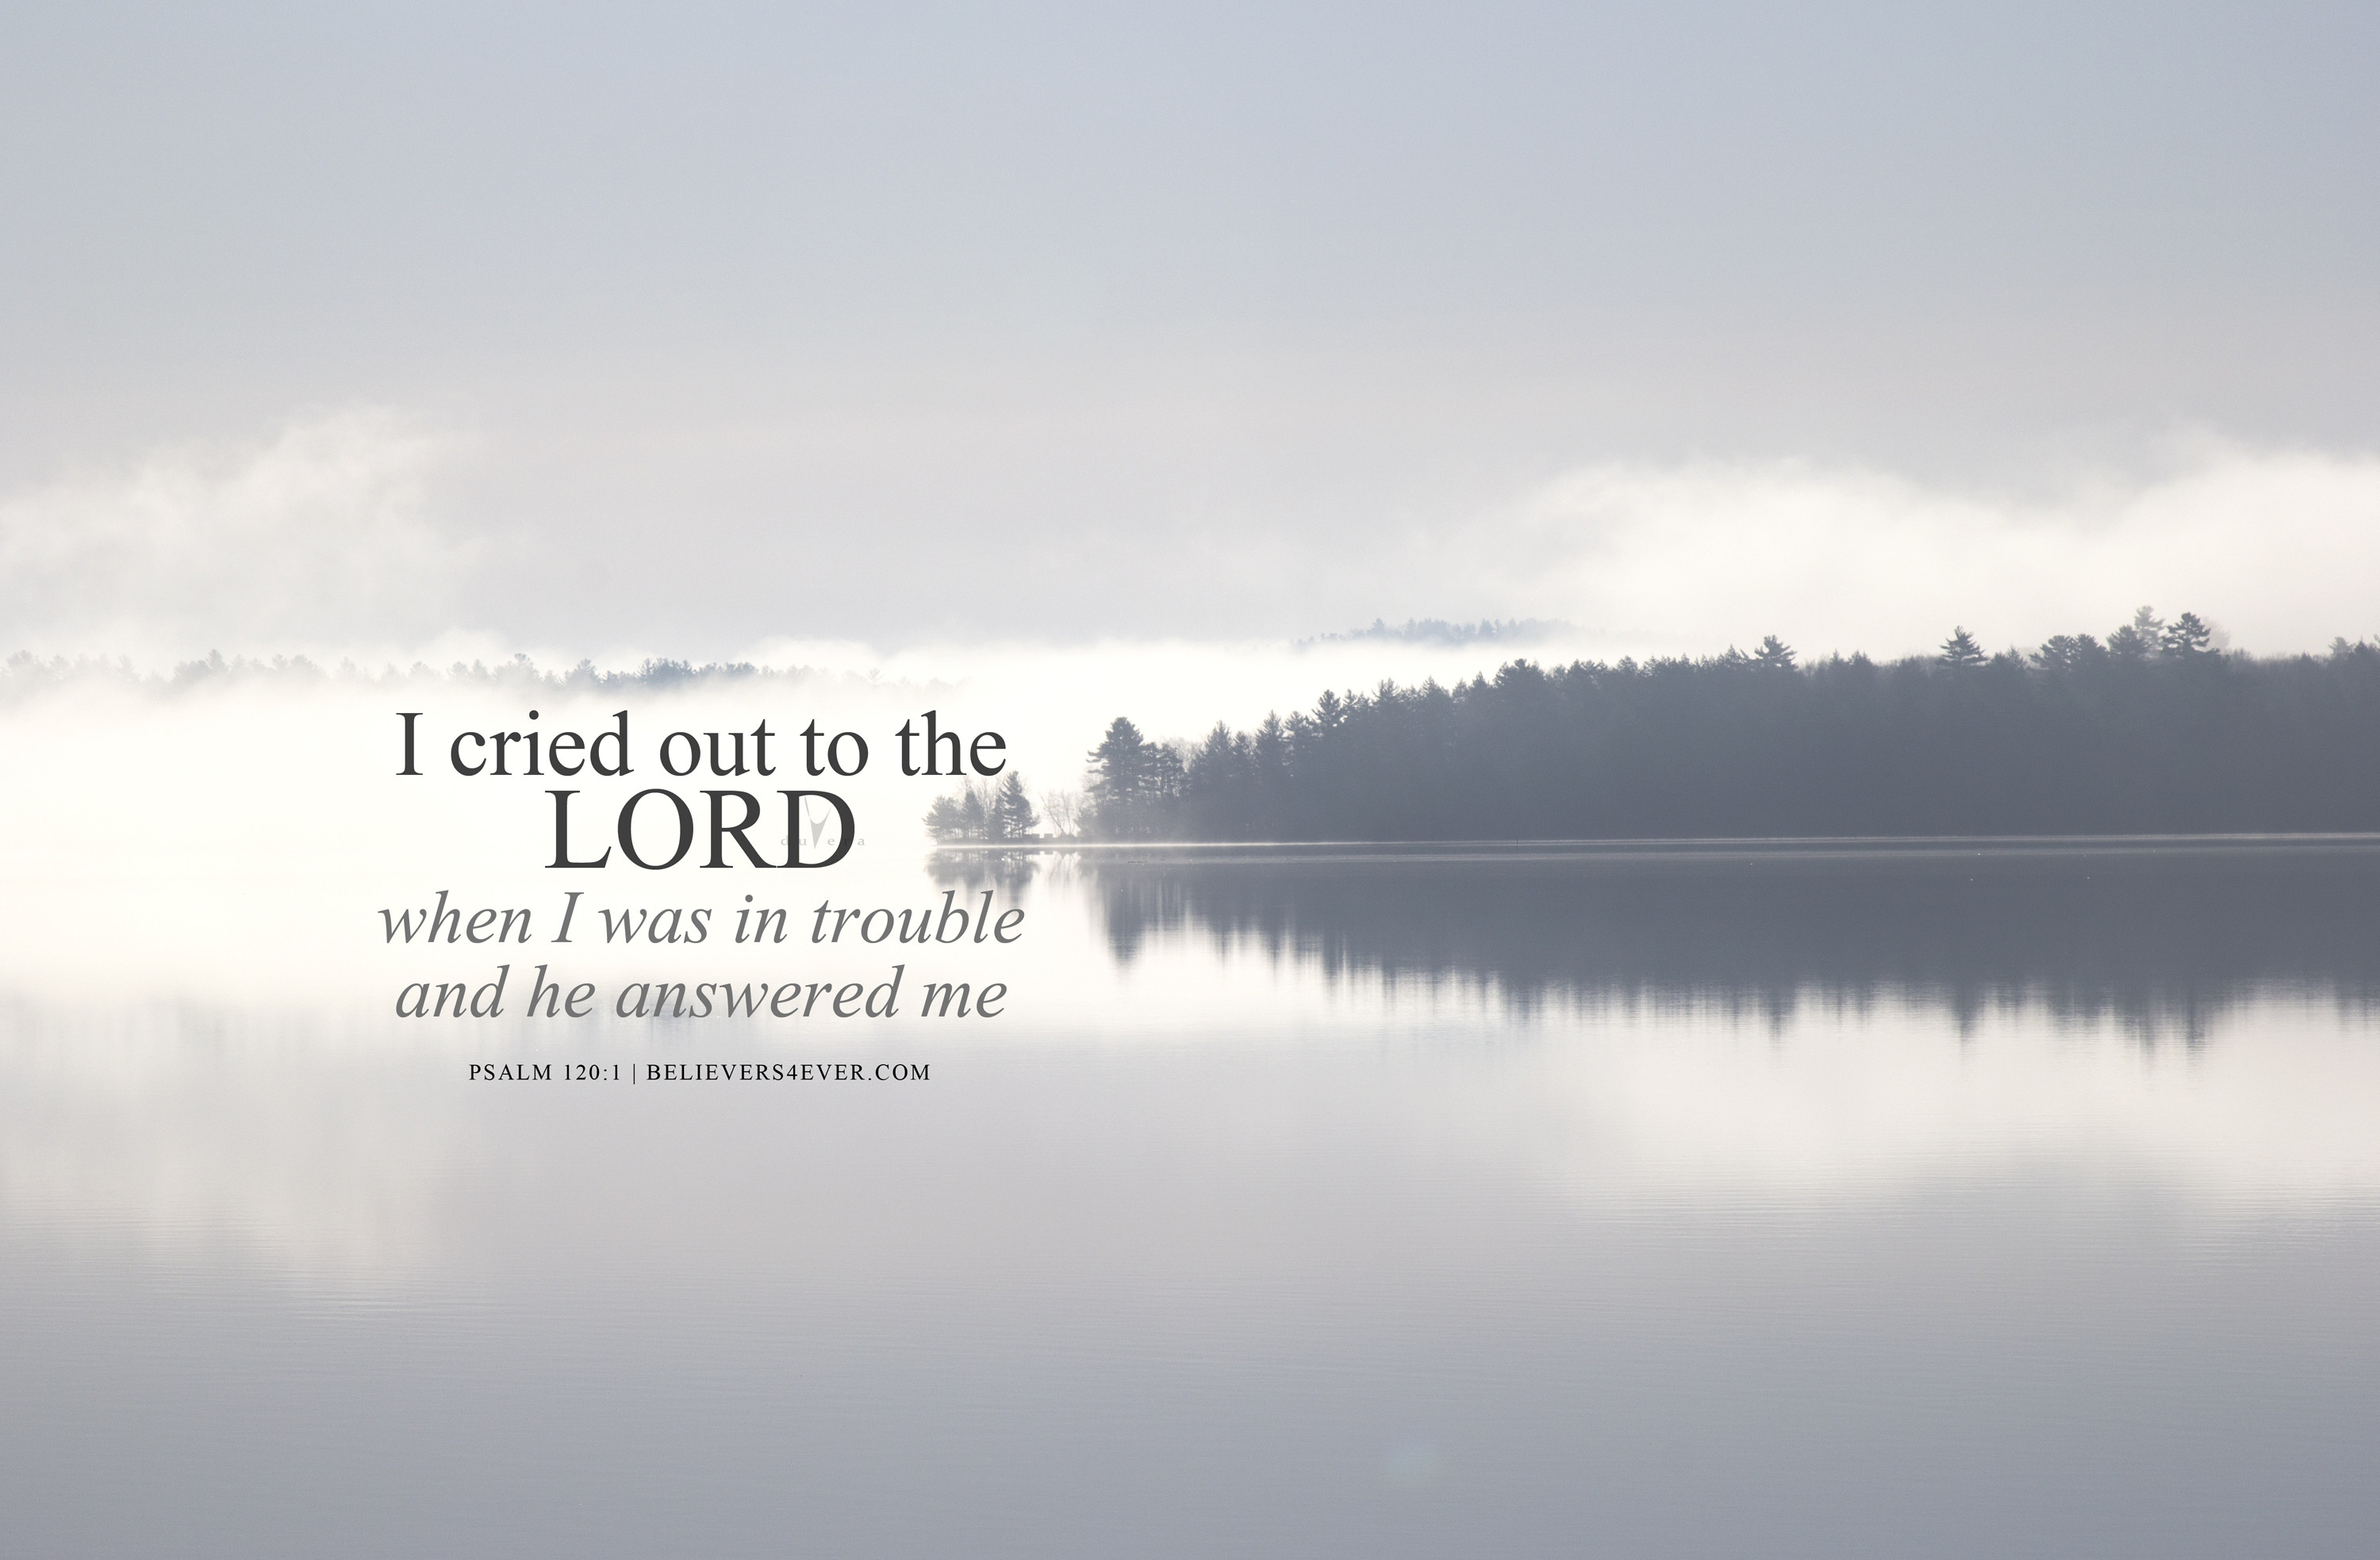 3000x1967 Christian desktop wallpaper with bible verse. Use for church sermons and  more. I cried